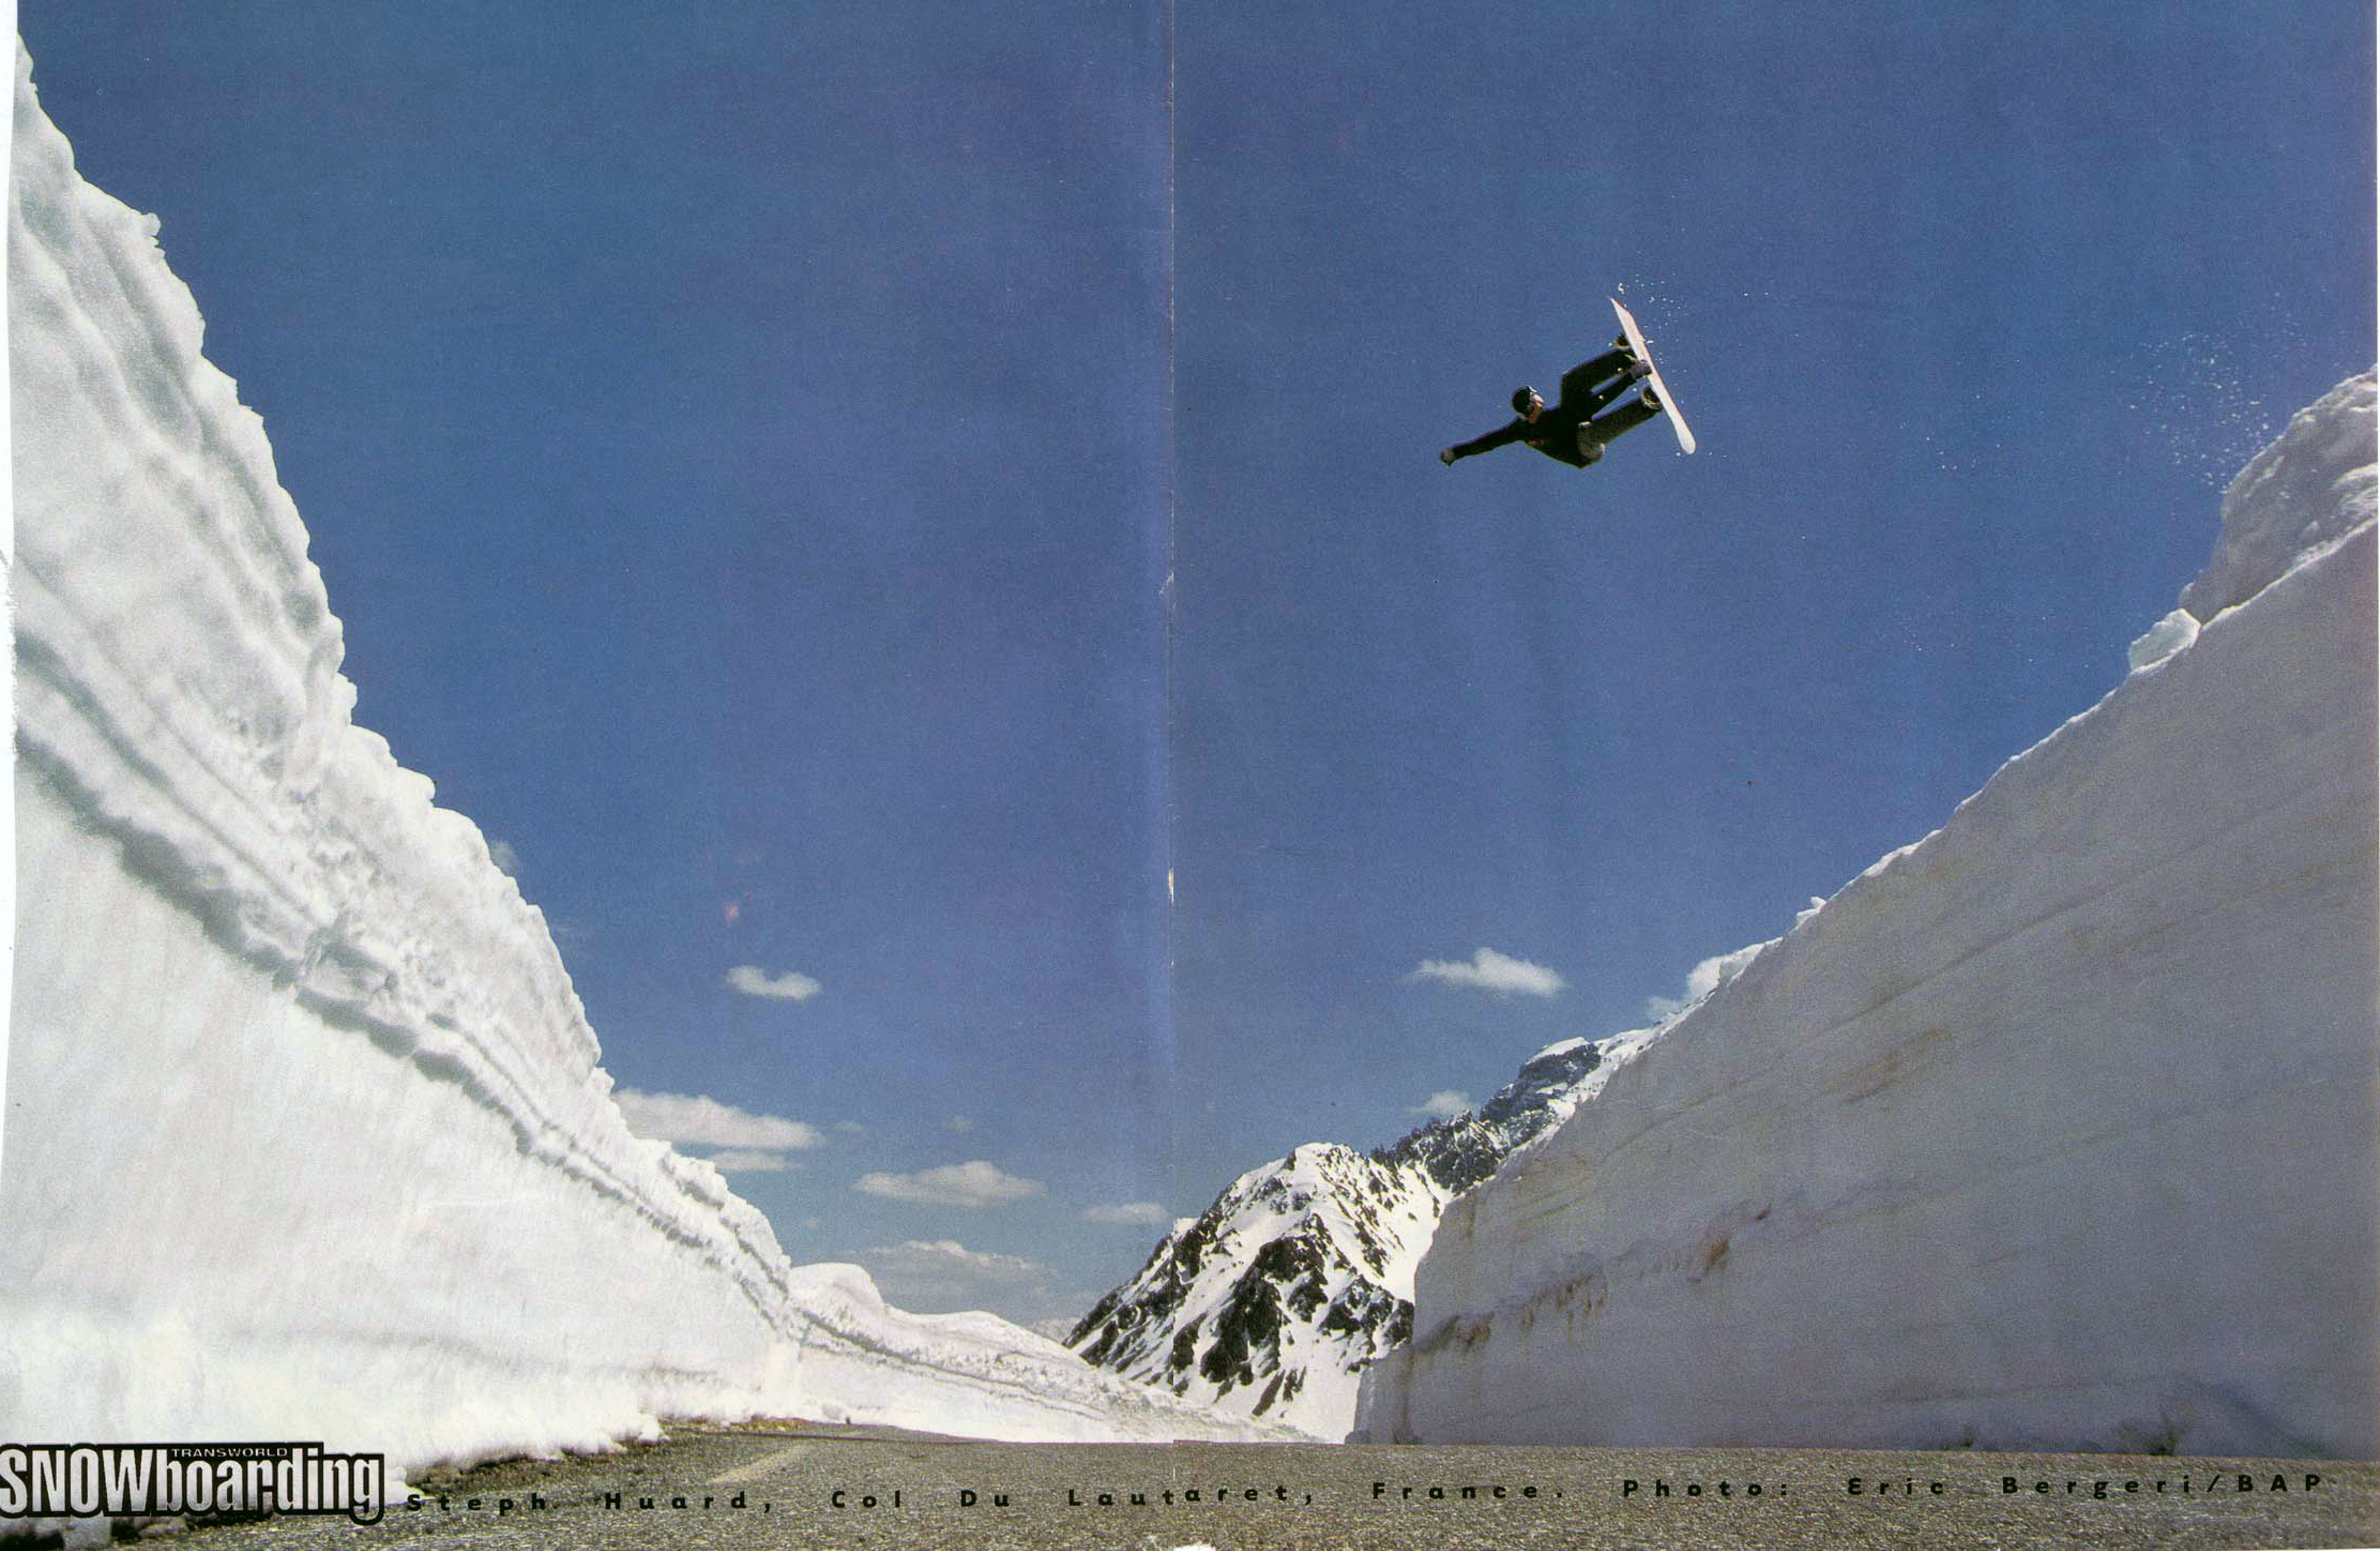 Transworld Snowboarding magazine - Poster with a cab 540 underflip in Galibier moutain (FR)